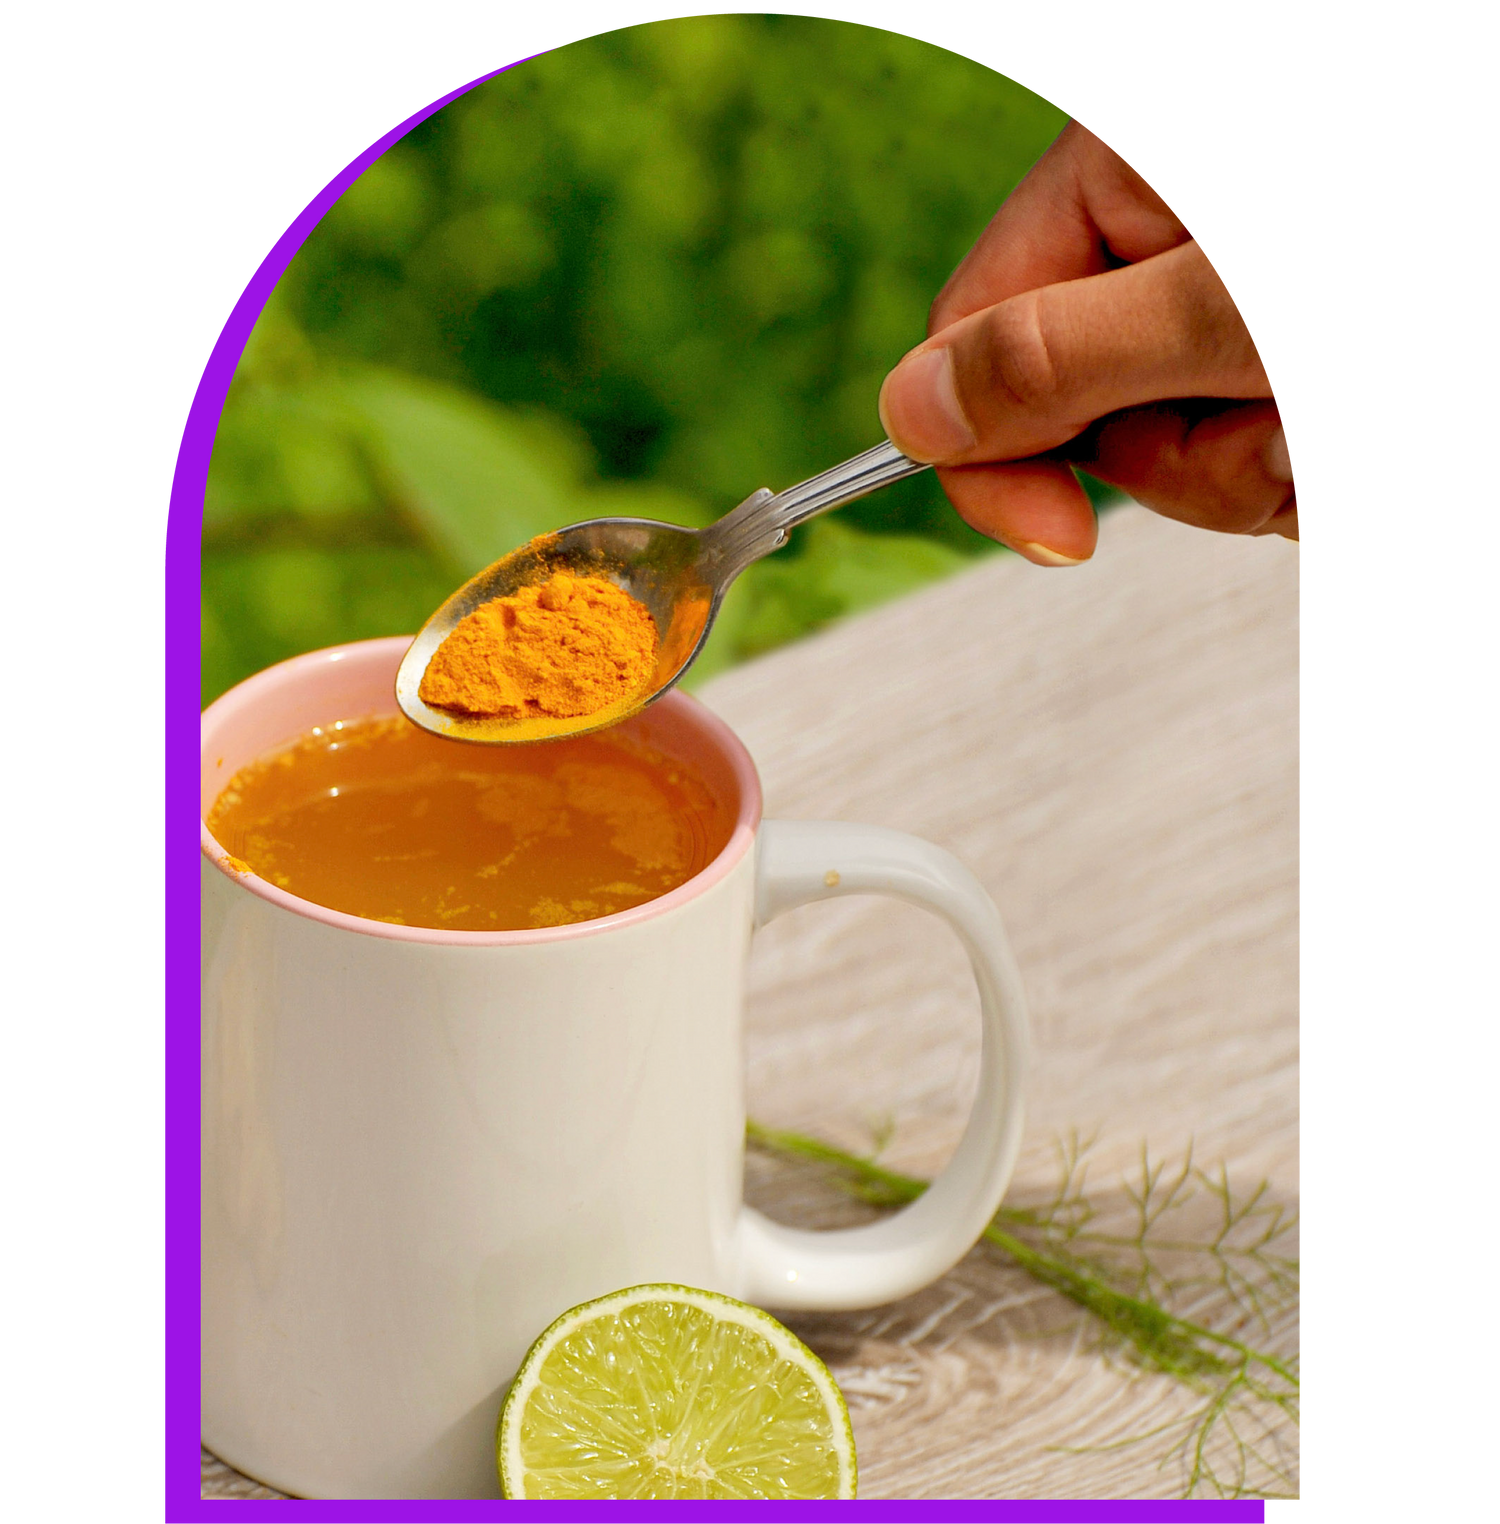 spoon of sustainably sourced turmeric powder spice over a mug of tea and slice of lime